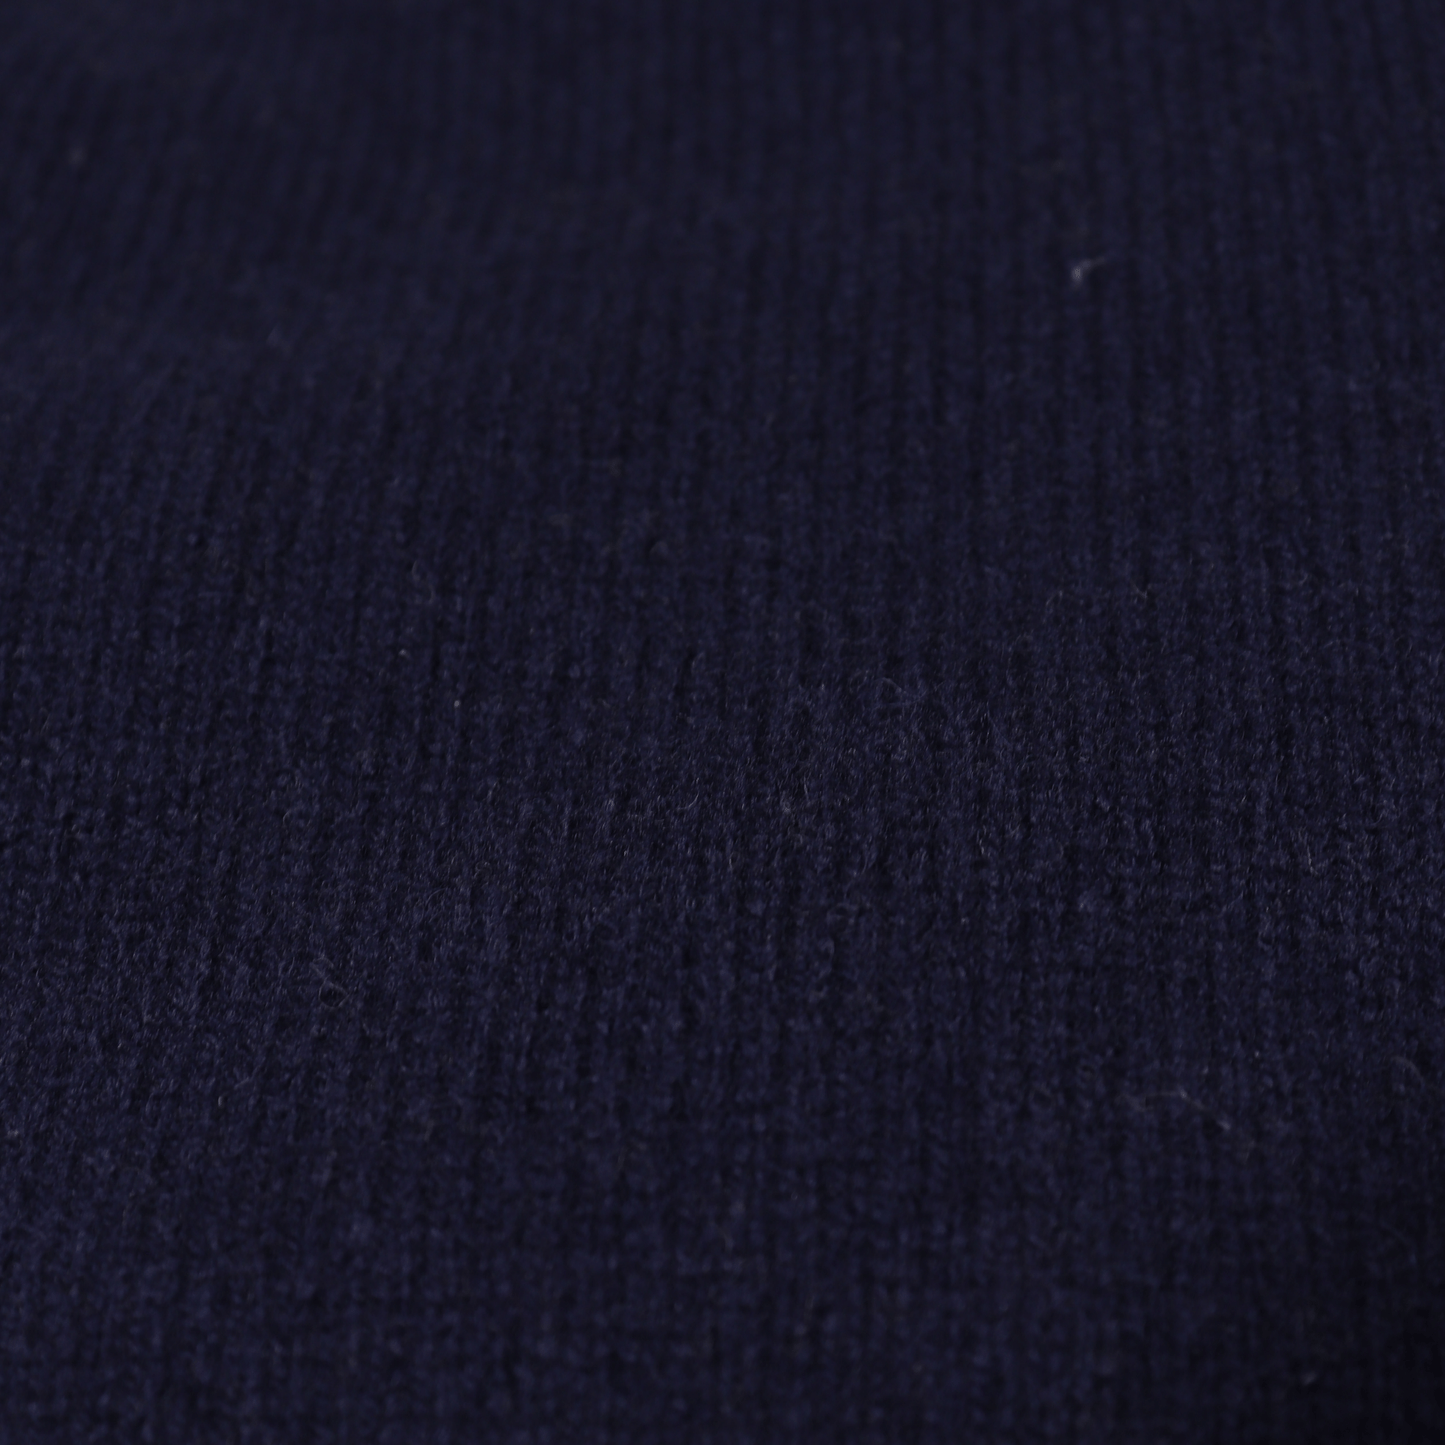 Stay warm and stylish with the Loch Lomond 100% lambswool long-sleeve jersey in Navy (3696). Made from premium lambswool, this jersey offers both comfort and durability. Perfect for chilly days and evenings, it's a versatile addition to any wardrobe. Shop in-store at 337 Monty Naicker Street, Durban or online at www.omarstailors.com